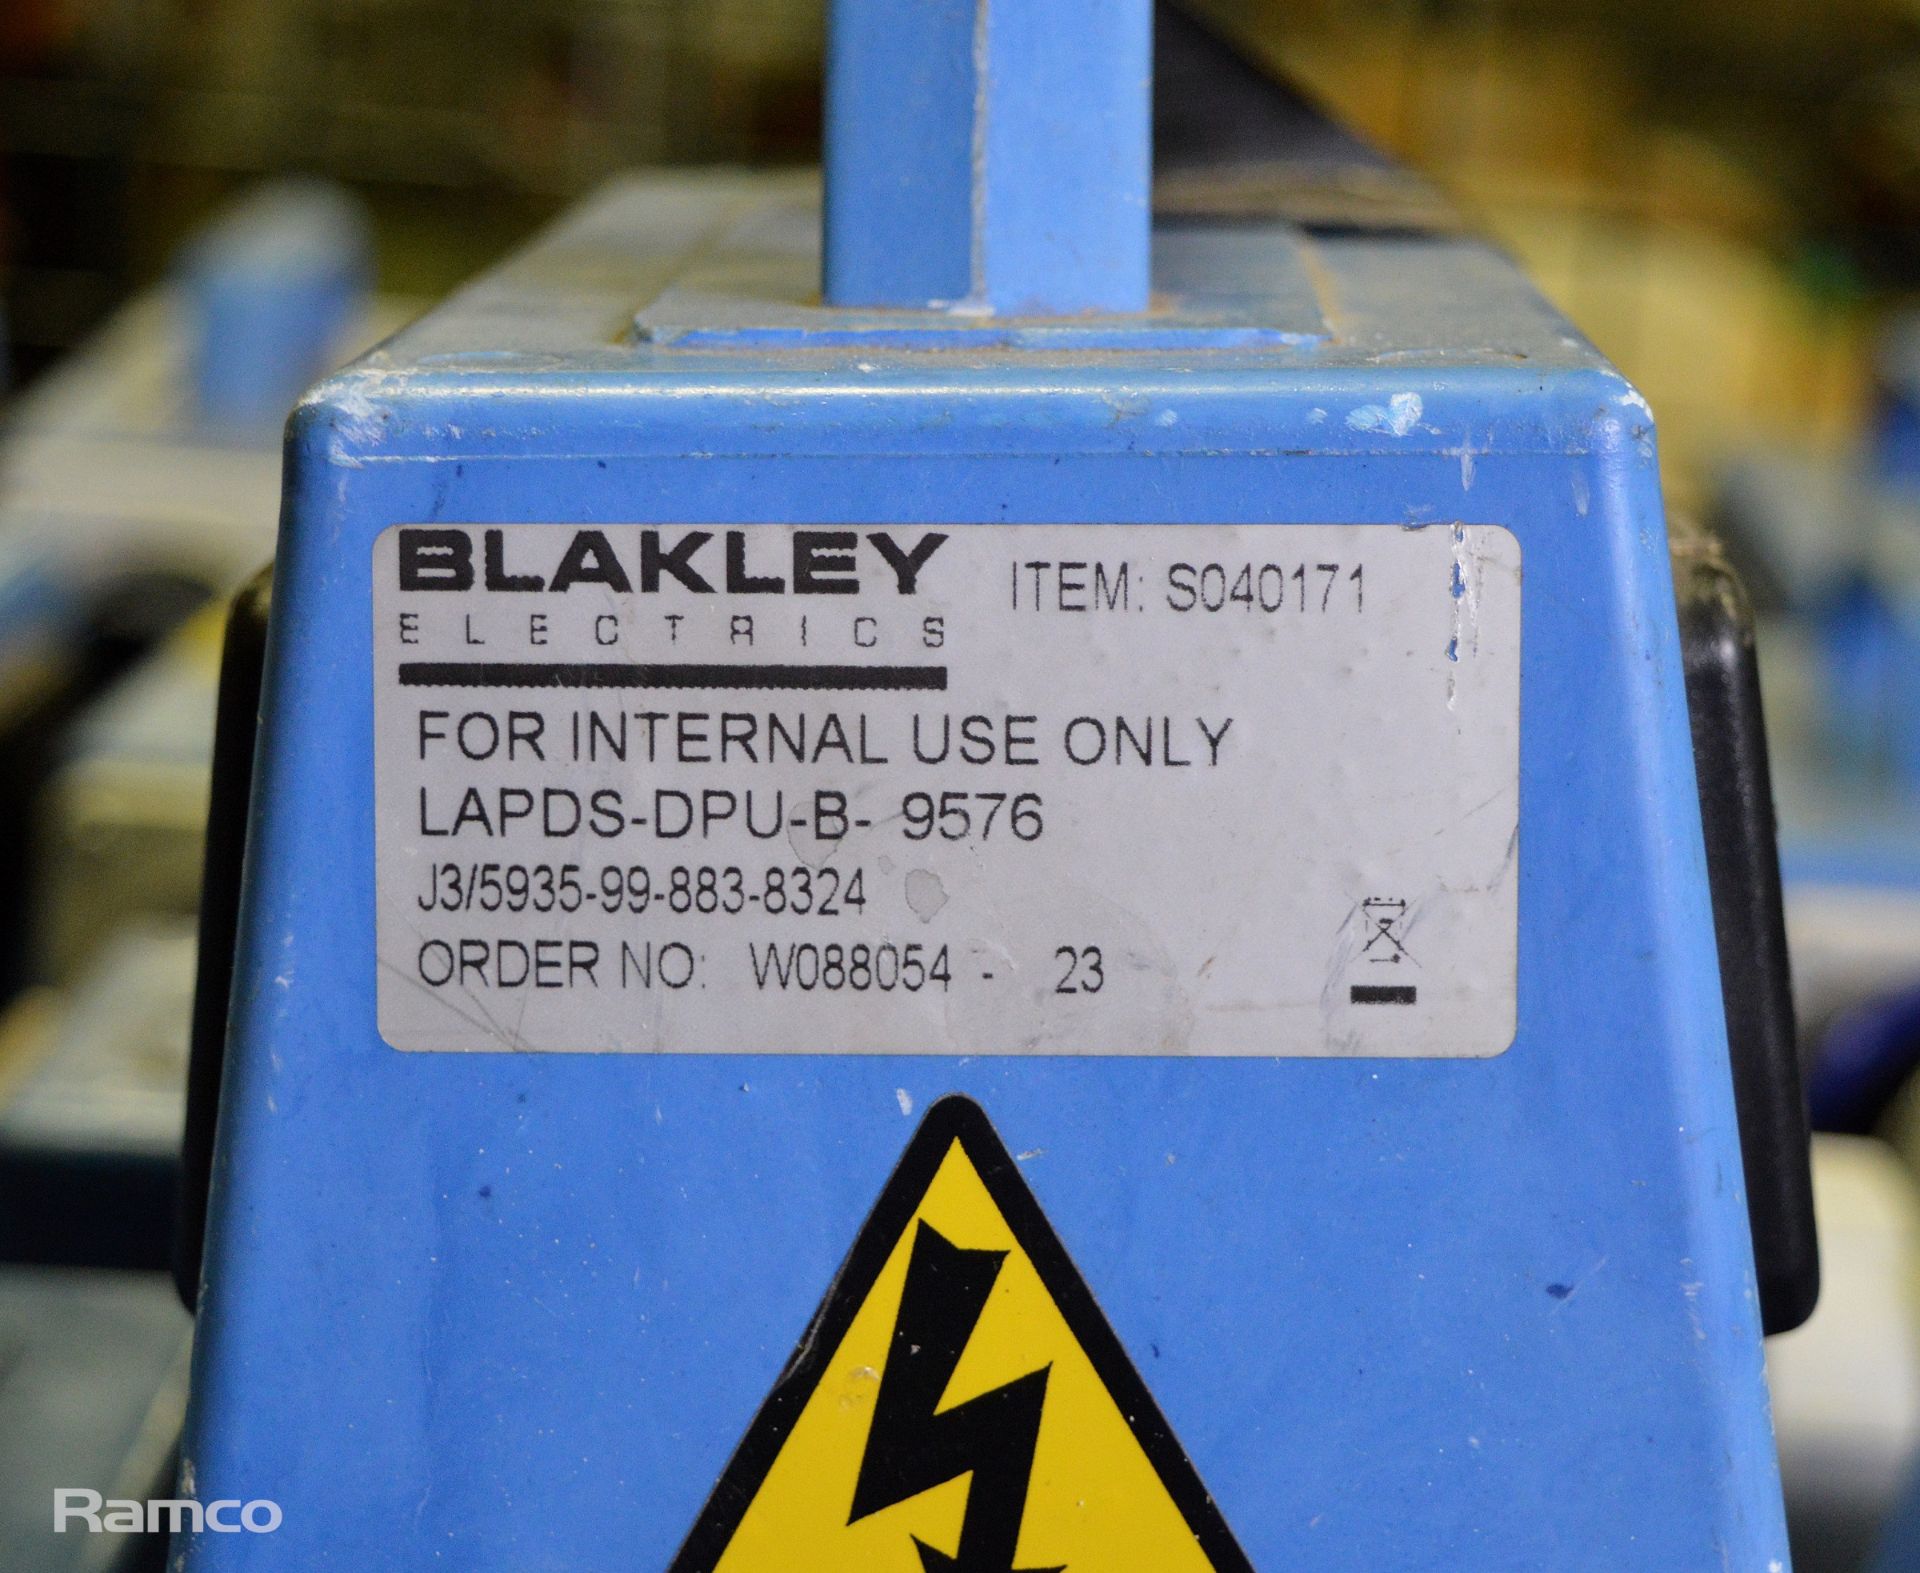 30x Blakley A7190507 Electric Outlet Power Boxes - 240v - Image 3 of 3